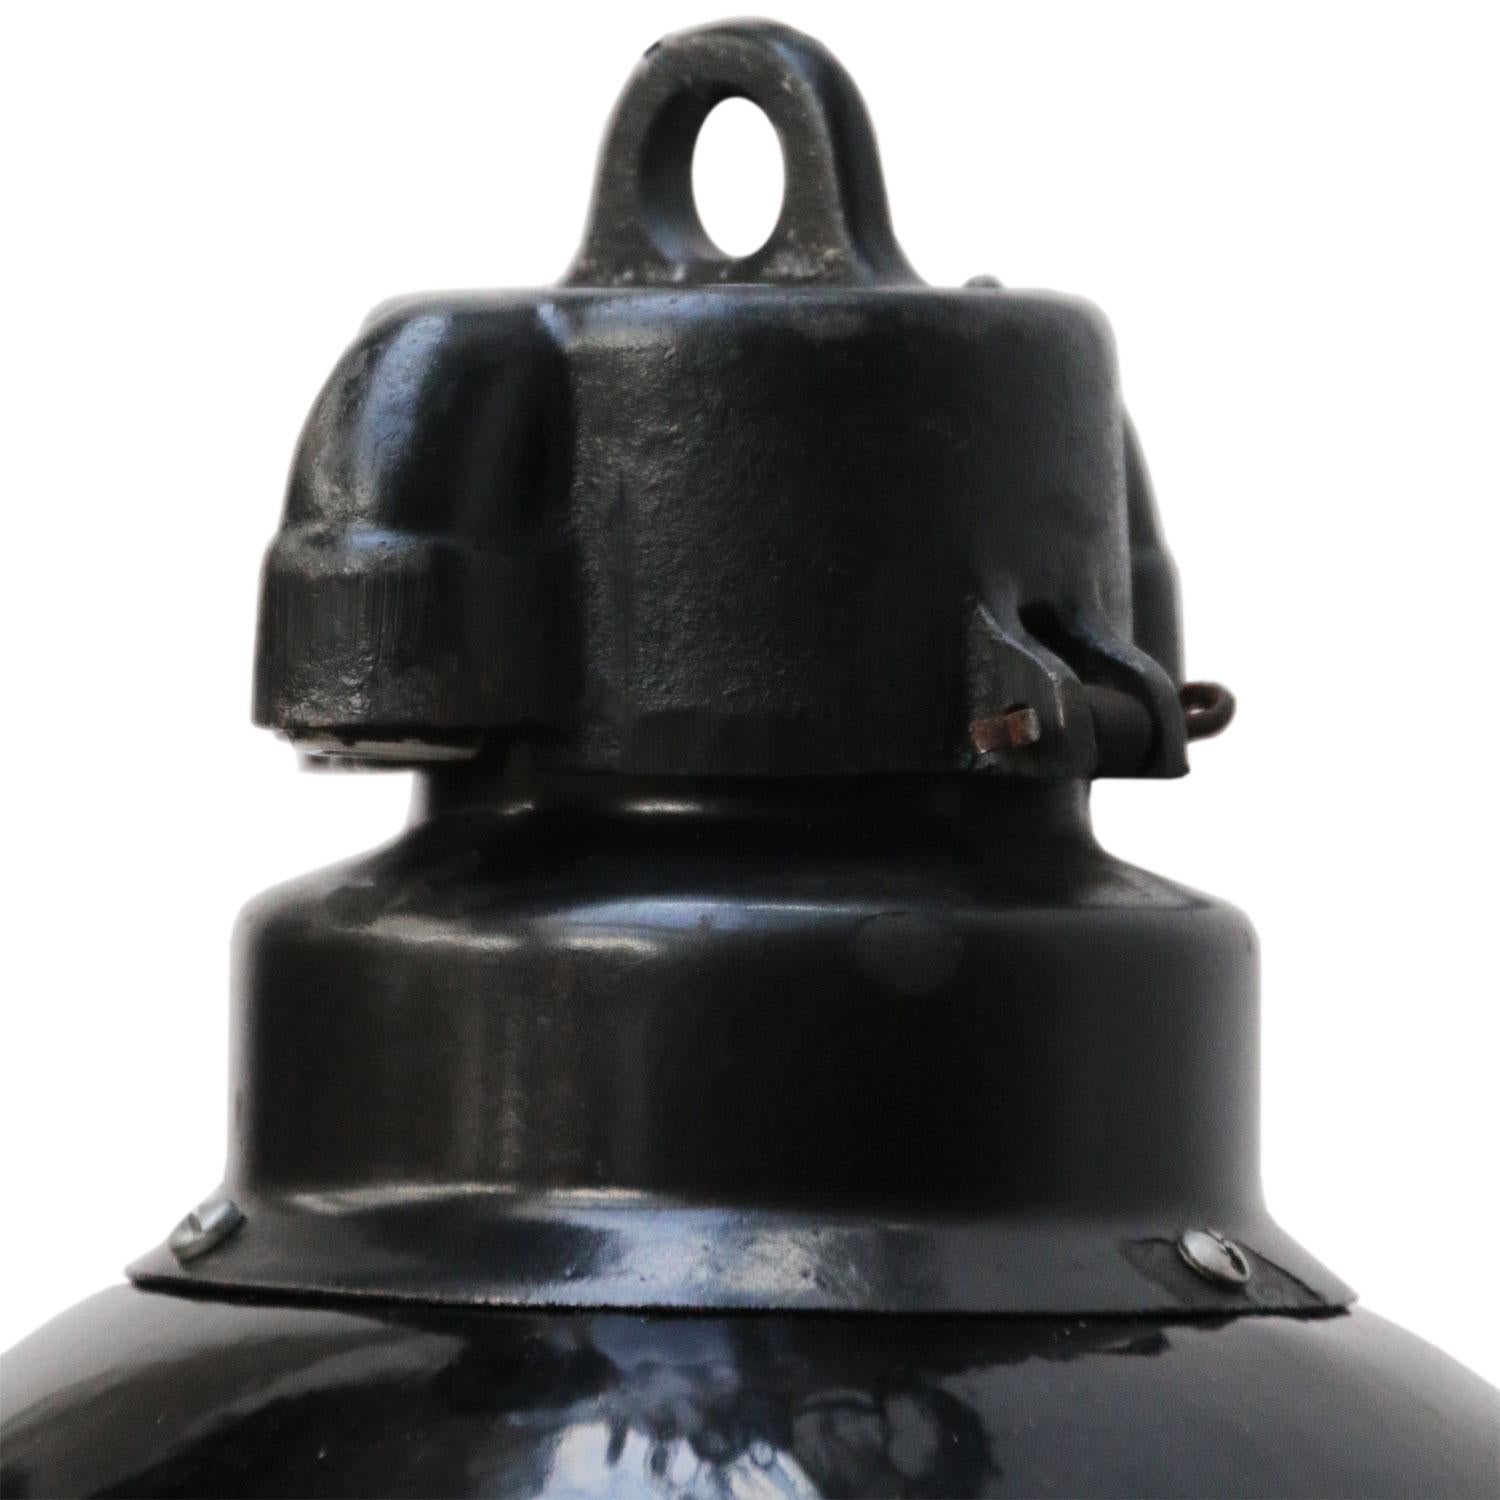 Bauhaus Classic from the 1930s. Black enamel Industrial hanging lamp.
Cast iron top. White interior.

Weight: 1.7 kg / 3.7 lb

All lamps have been made suitable by international standards for incandescent light bulbs, energy-efficient and LED